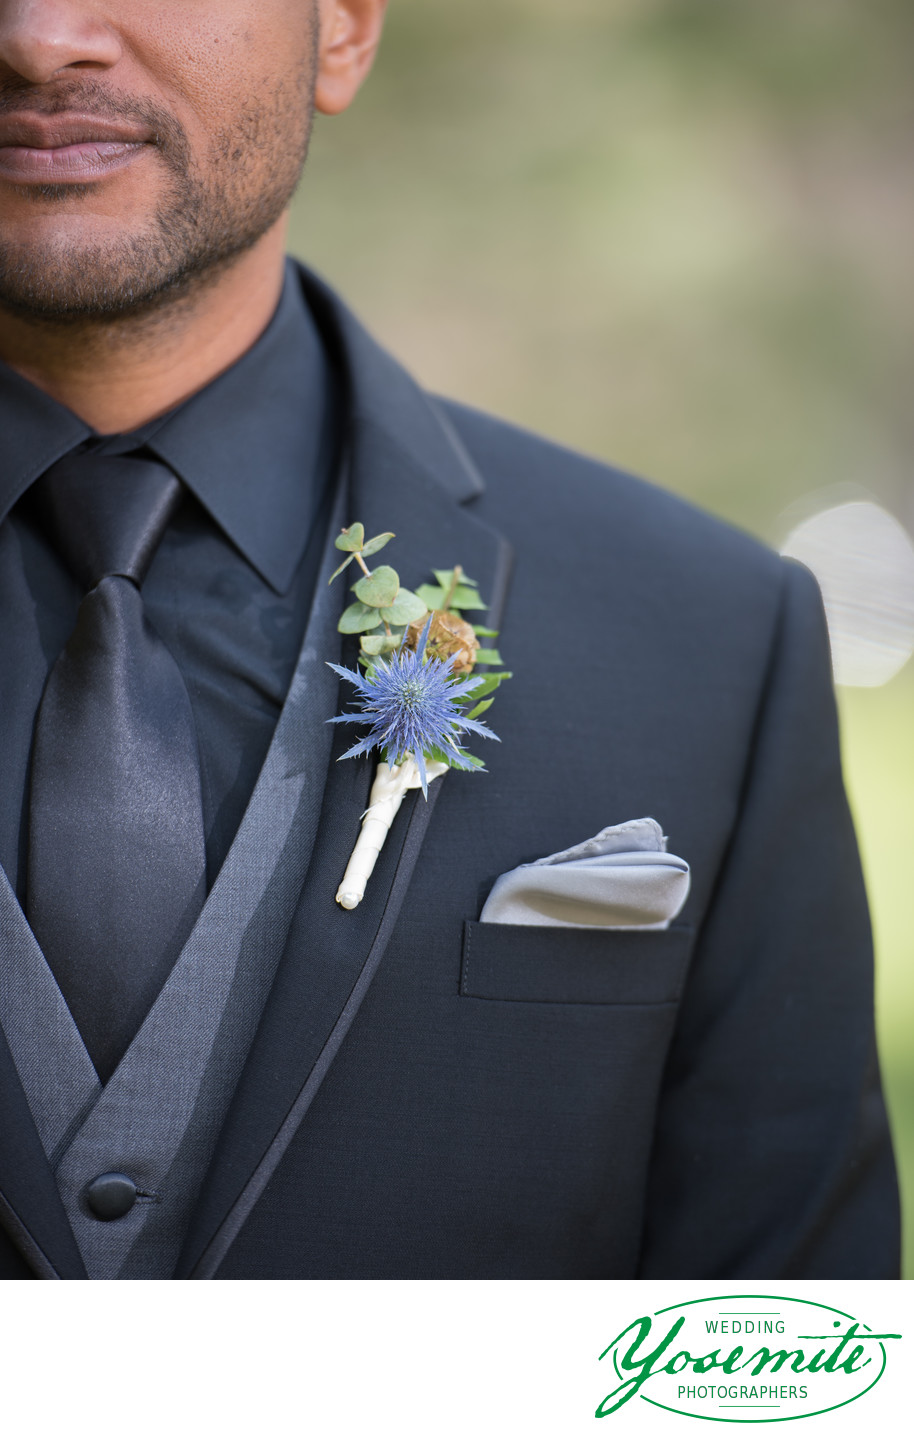 The Groom's Boutonniere at Ahwahnee Hotel Yosemite